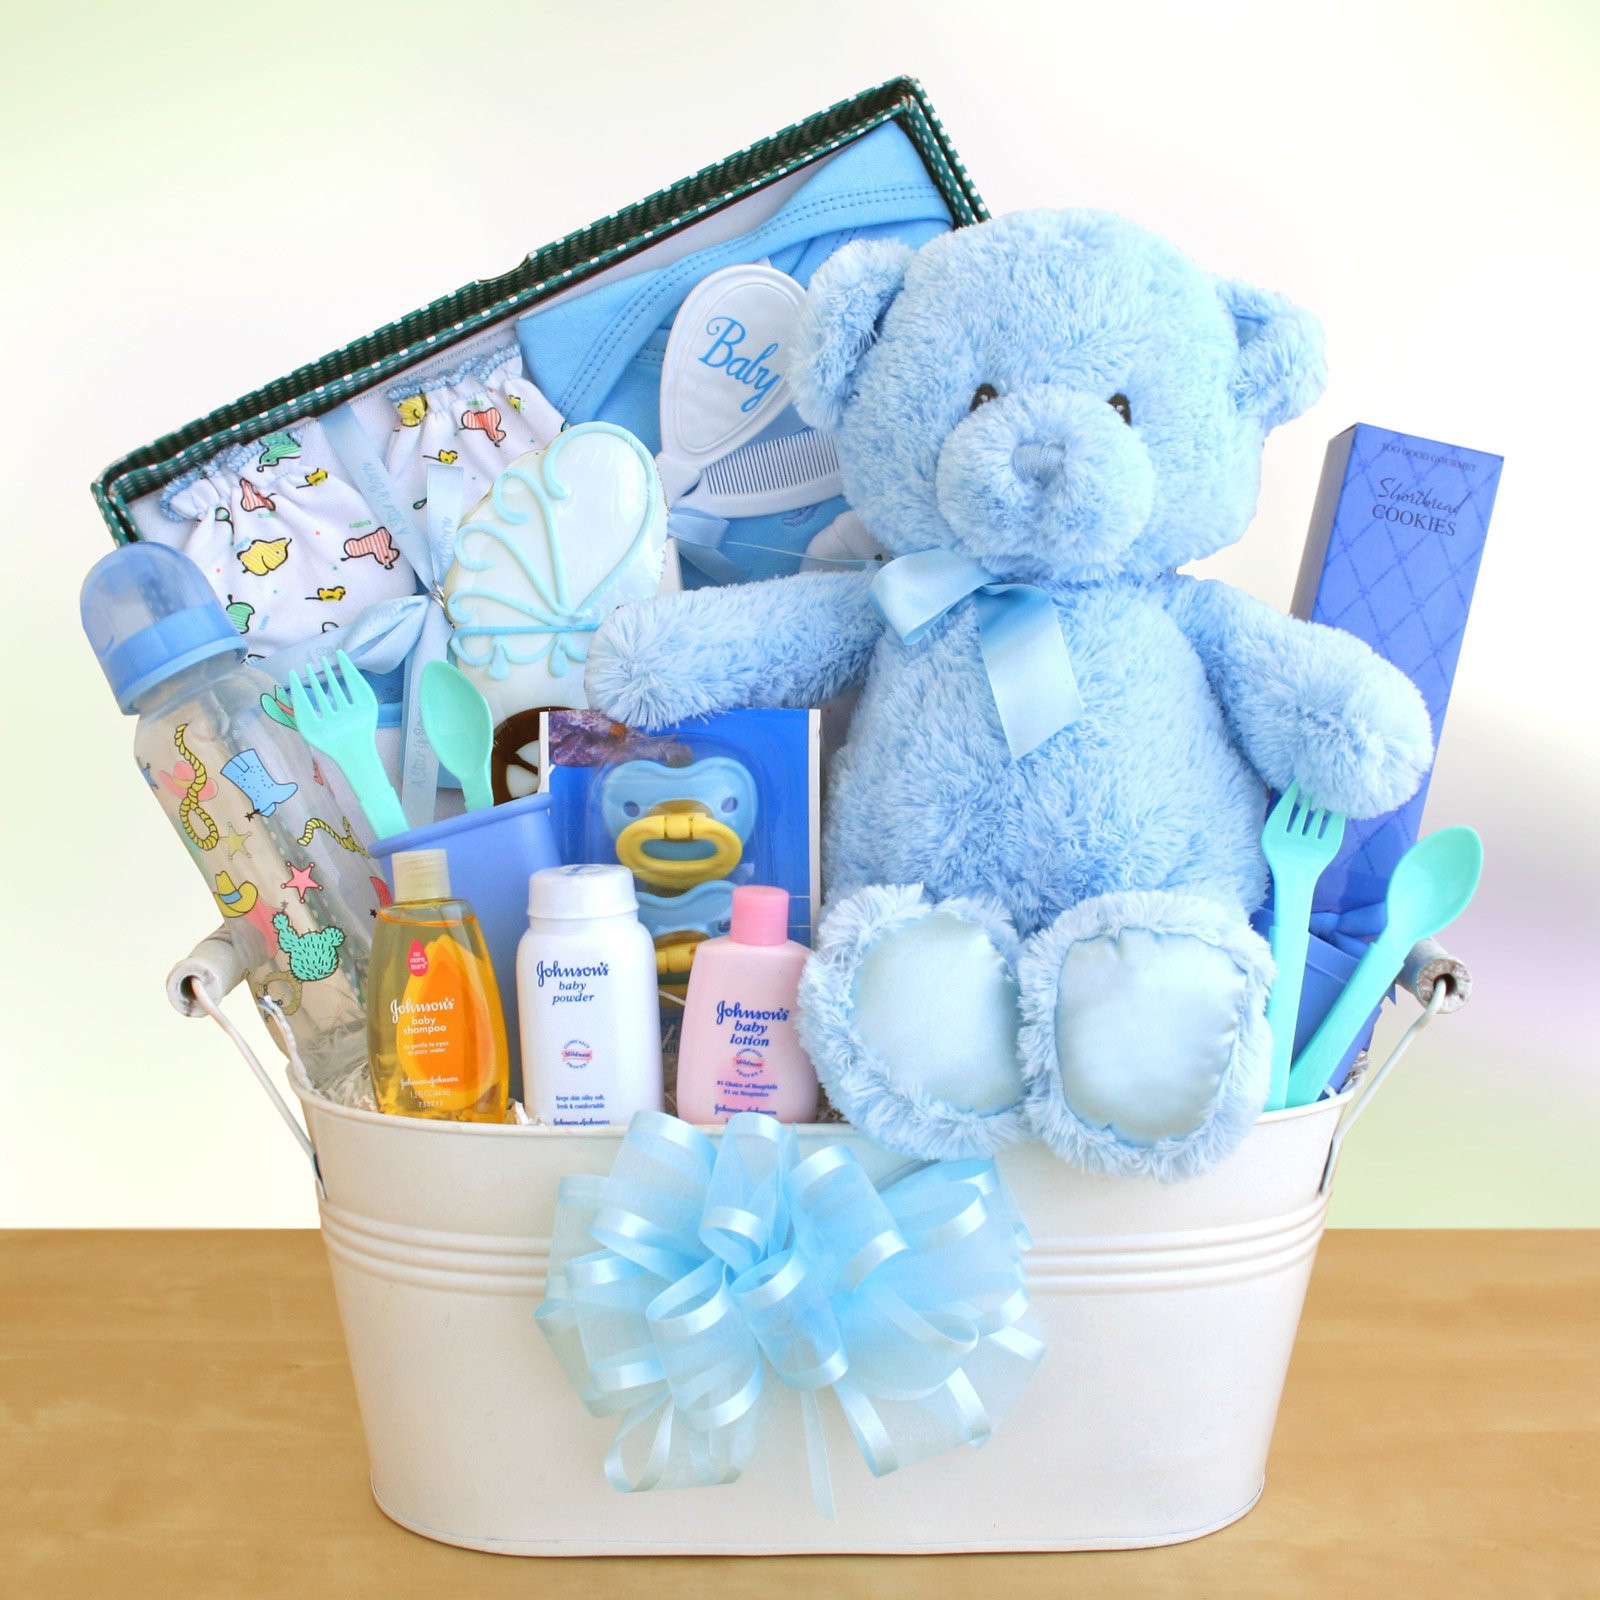 Baby Boy Shower Gift Ideas
 New Arrival Baby Boy Gift Basket Gift Baskets by